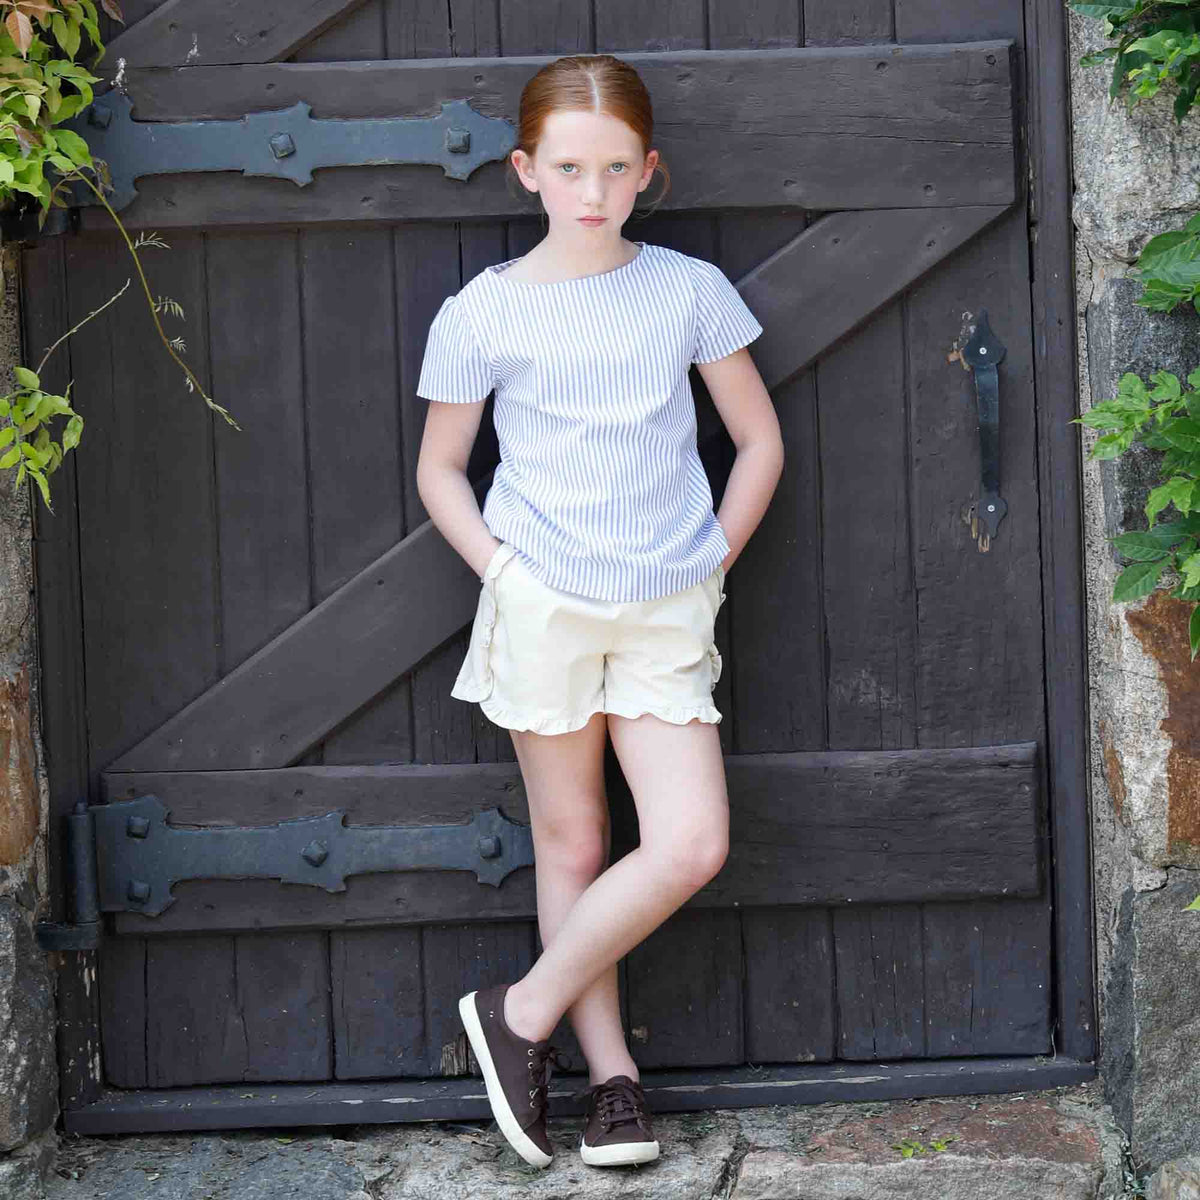 Classic and Preppy Sawyer Top, Barkley Stripe-Shirts and Tops-CPC - Classic Prep Childrenswear